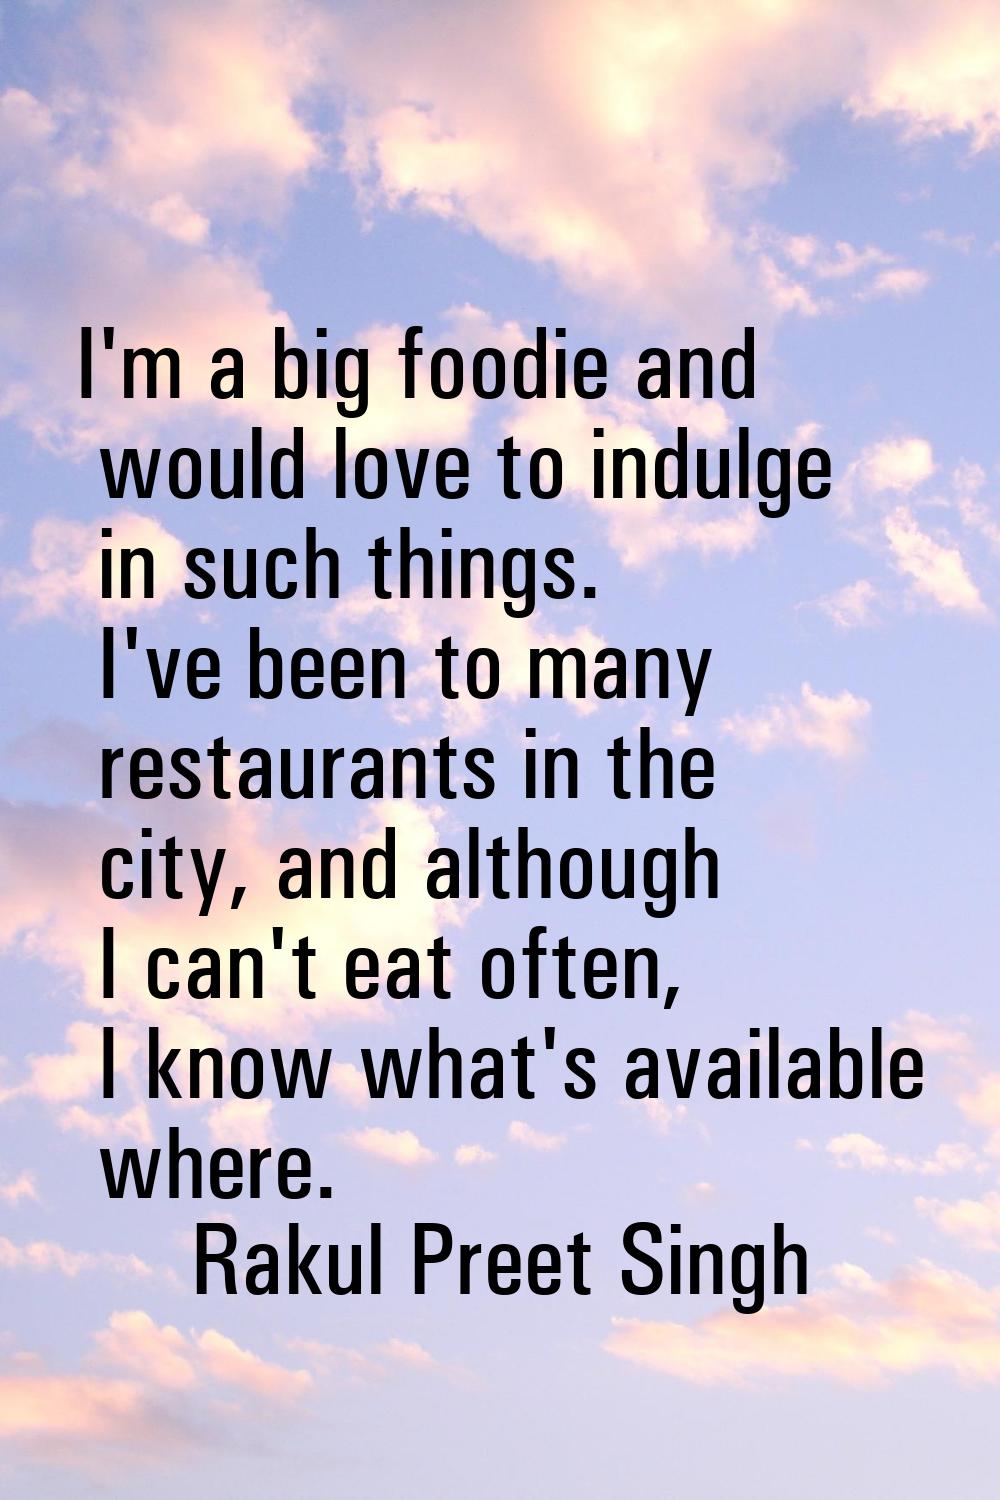 I'm a big foodie and would love to indulge in such things. I've been to many restaurants in the cit